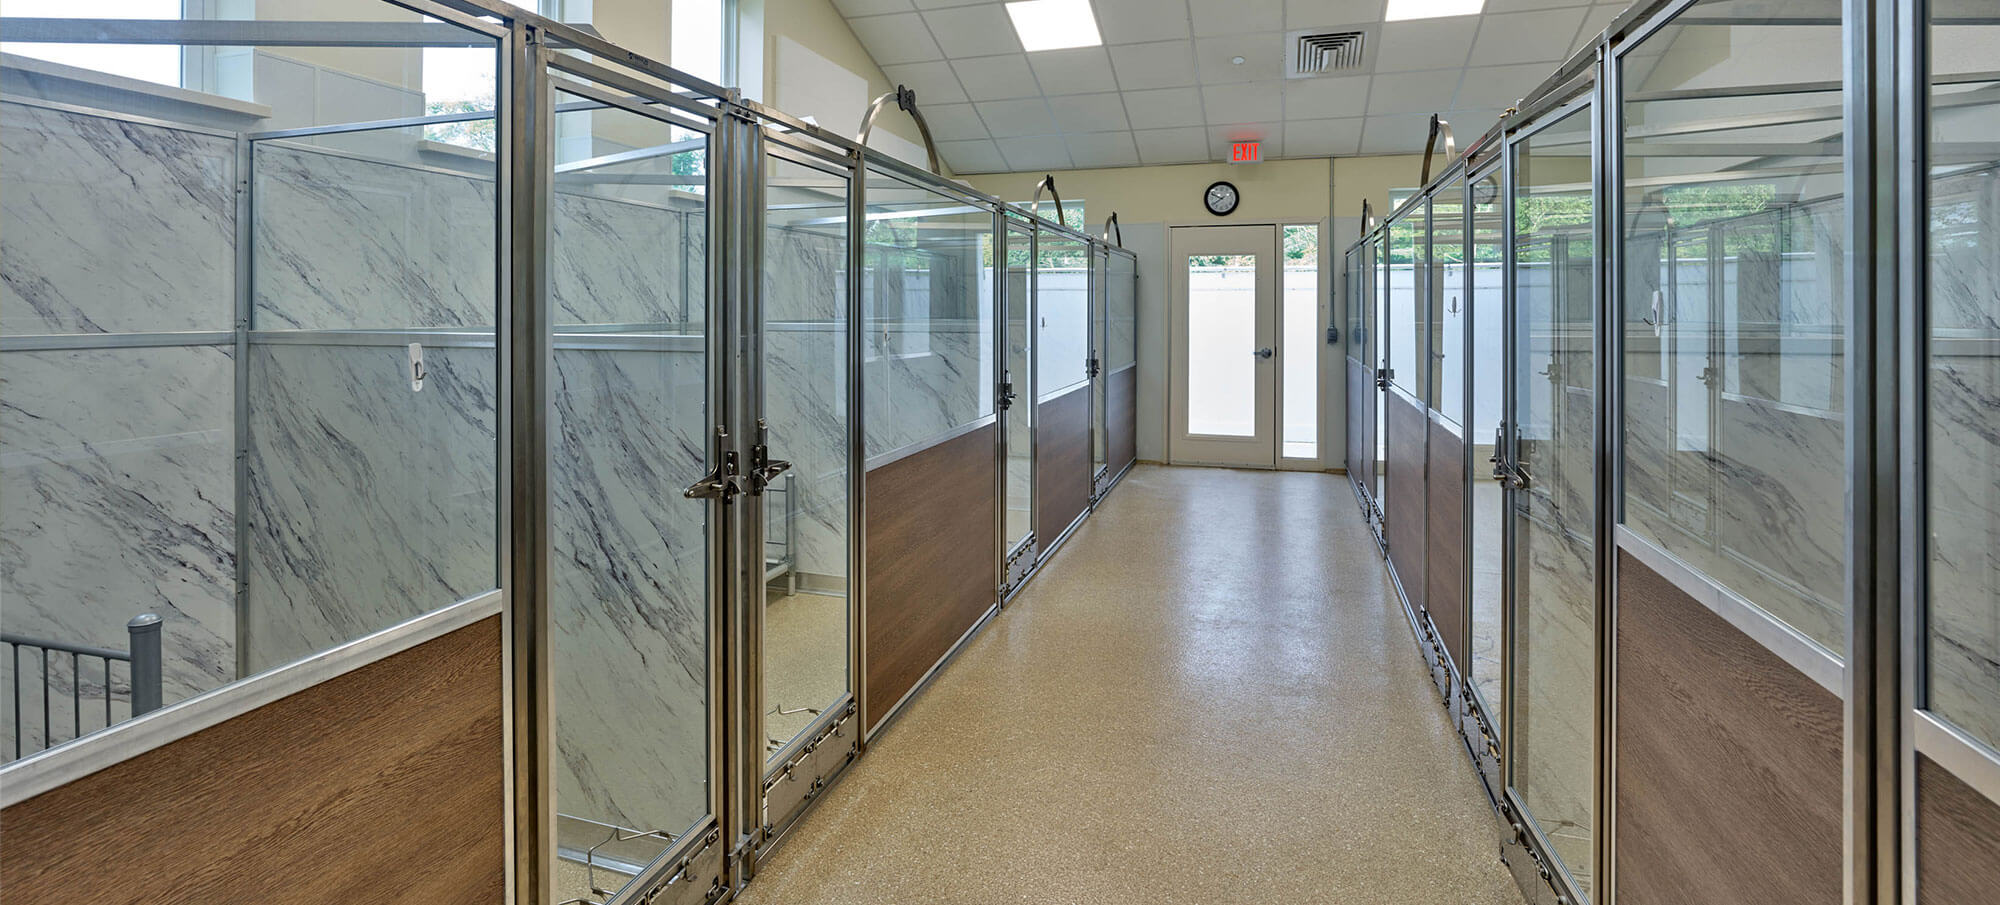 Greater Philadelphia Veterinary Hospital Architectural Design and Planning